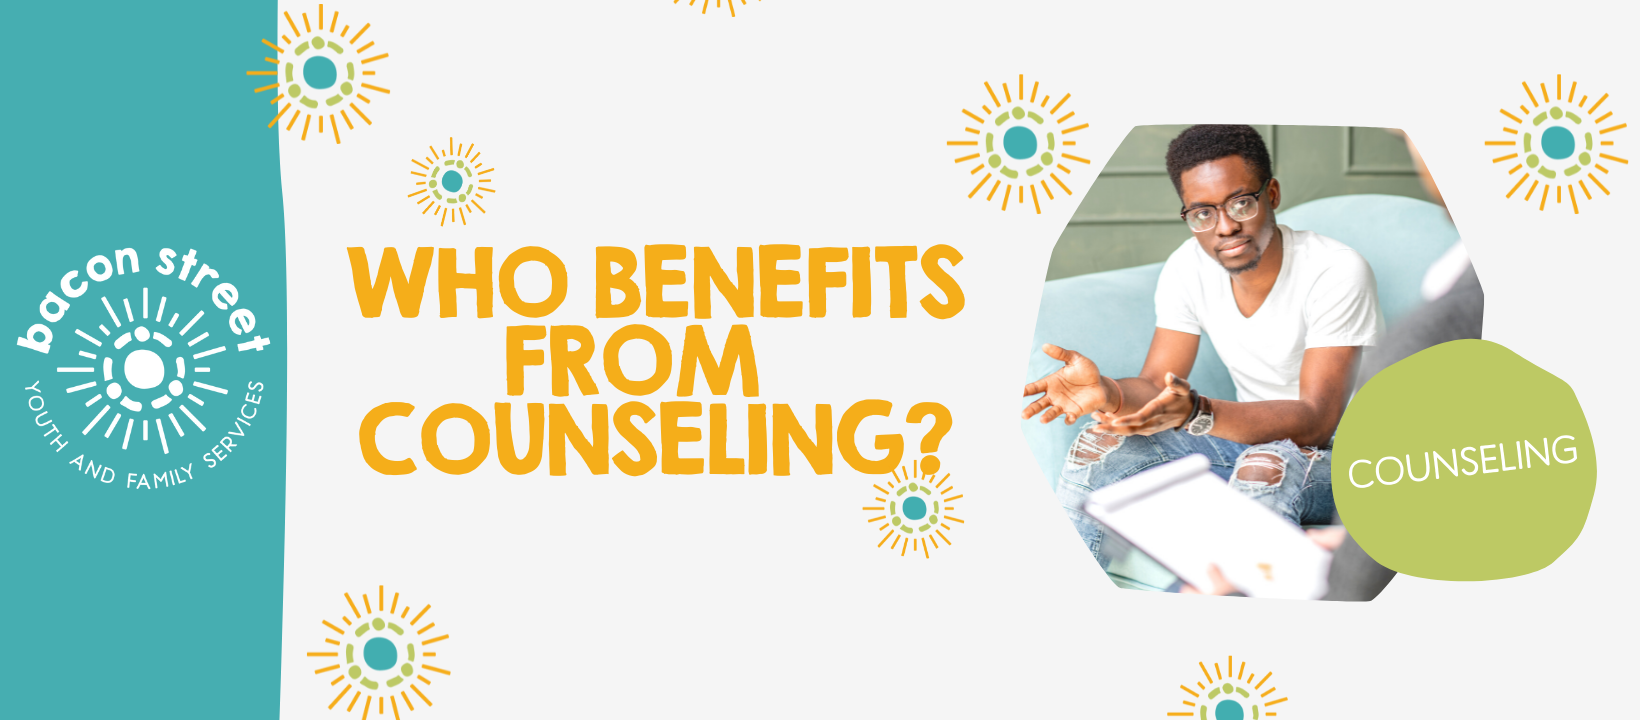 who benefits from counseling